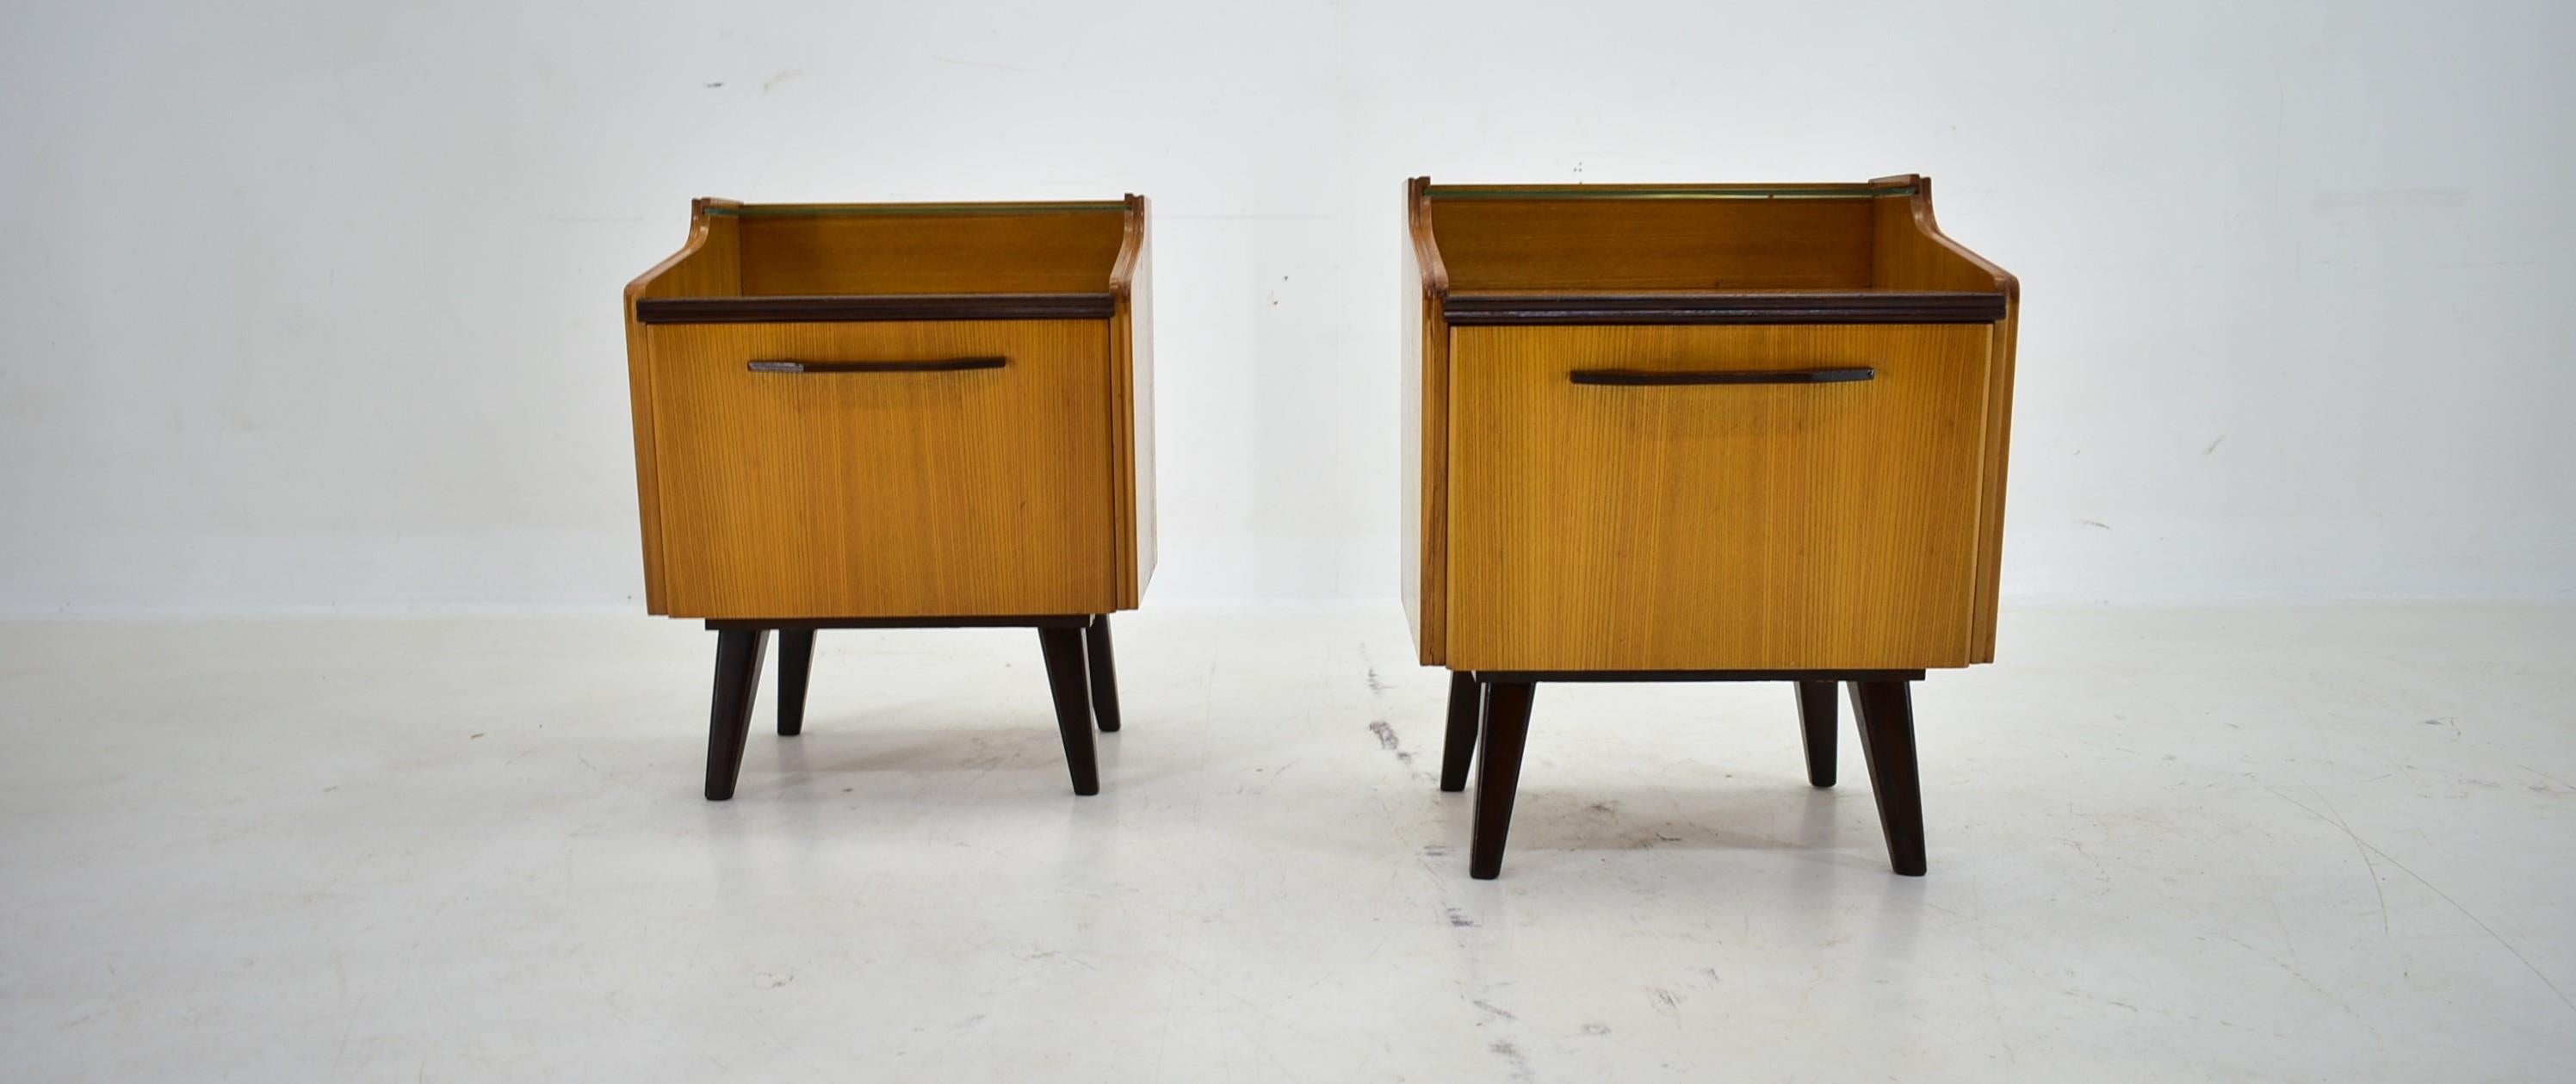 1960s Pair of Midcentury Bedside Tables by Mojmir Požár, Czechoslovakia For Sale 4